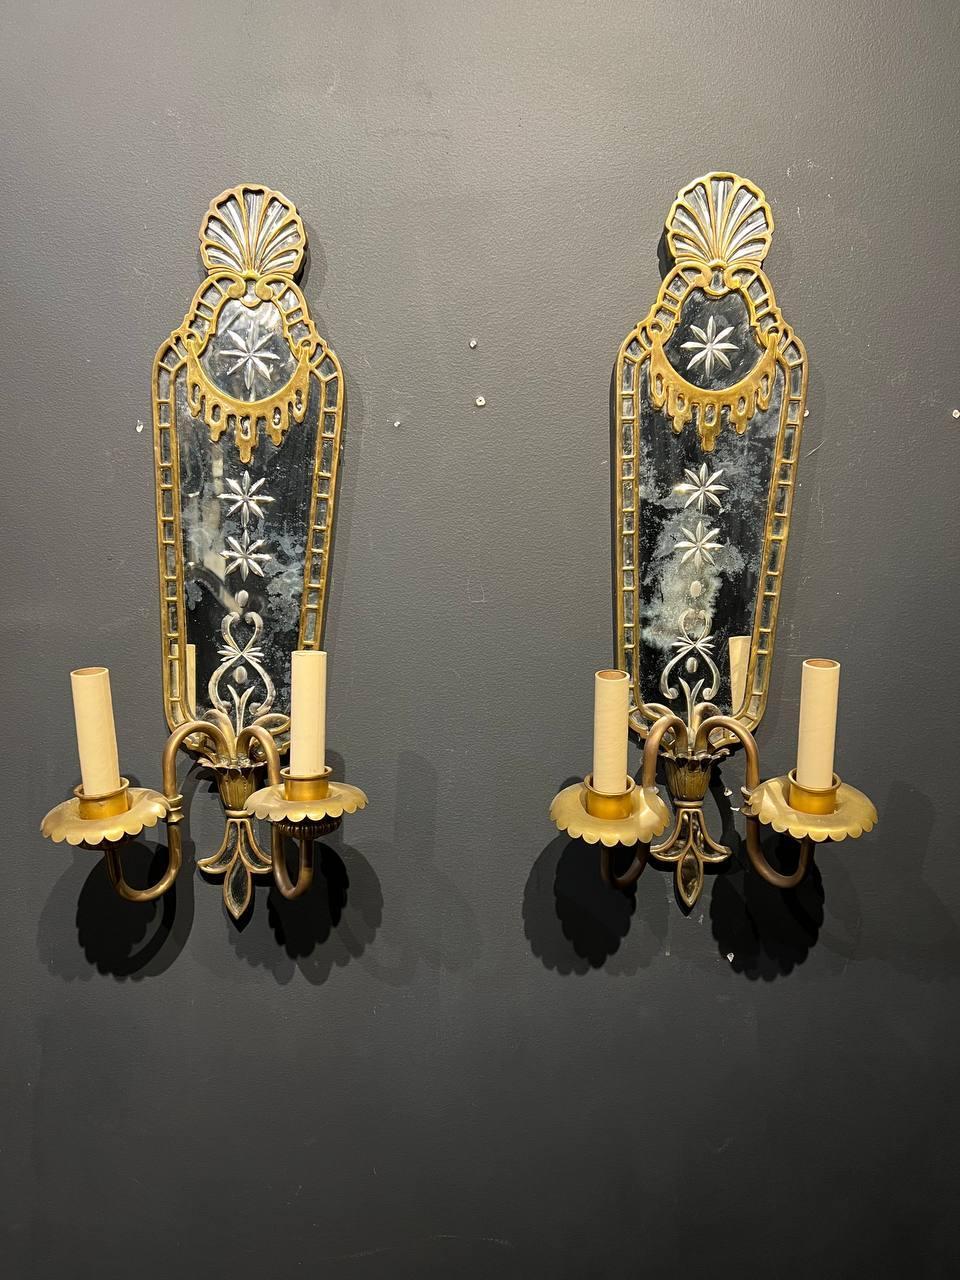 1920s Mirror Sconces with Bronze Fittings In Good Condition For Sale In New York, NY